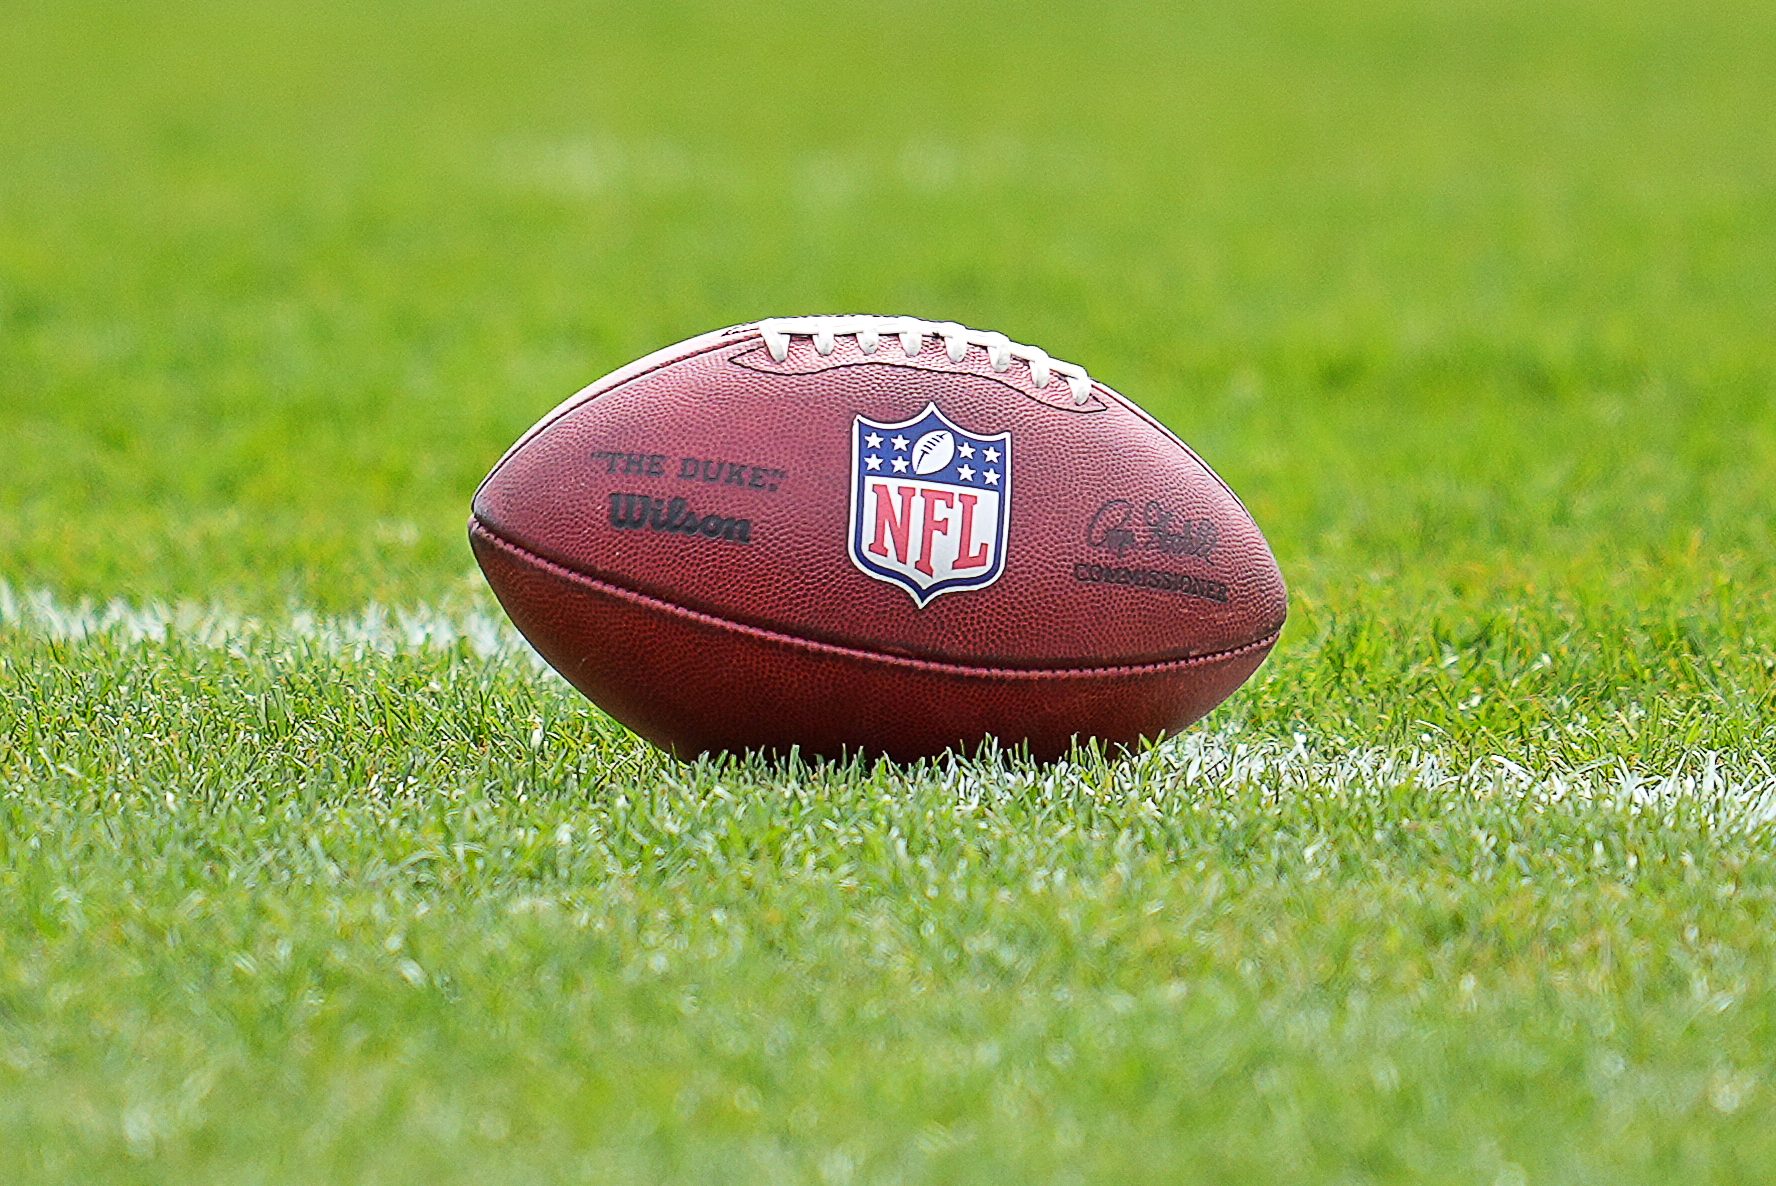 's NFL Sunday Ticket streaming deal gives it new ad